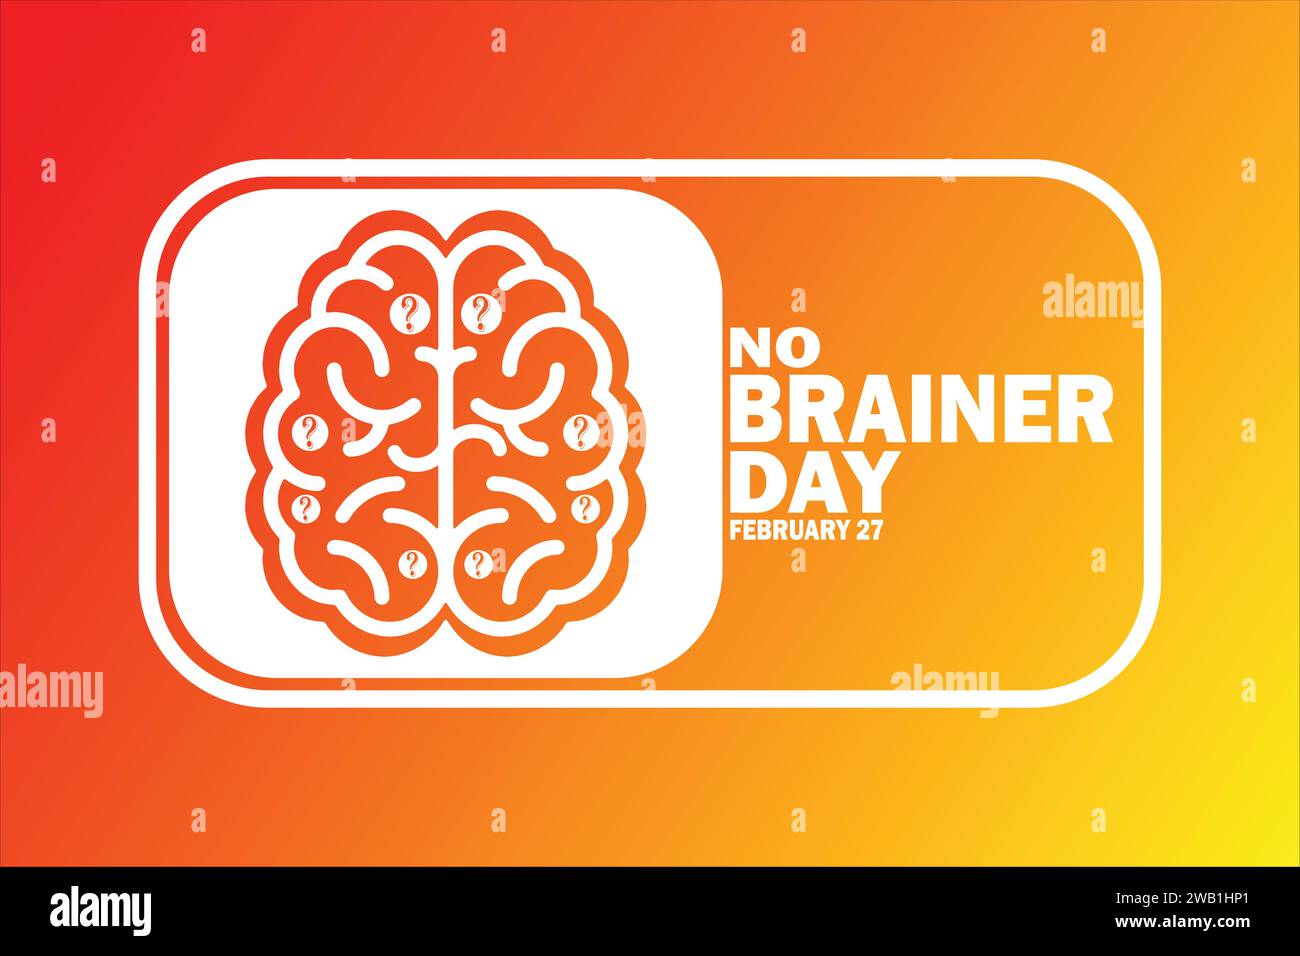 Wednesday 27th – No Brainer Day!